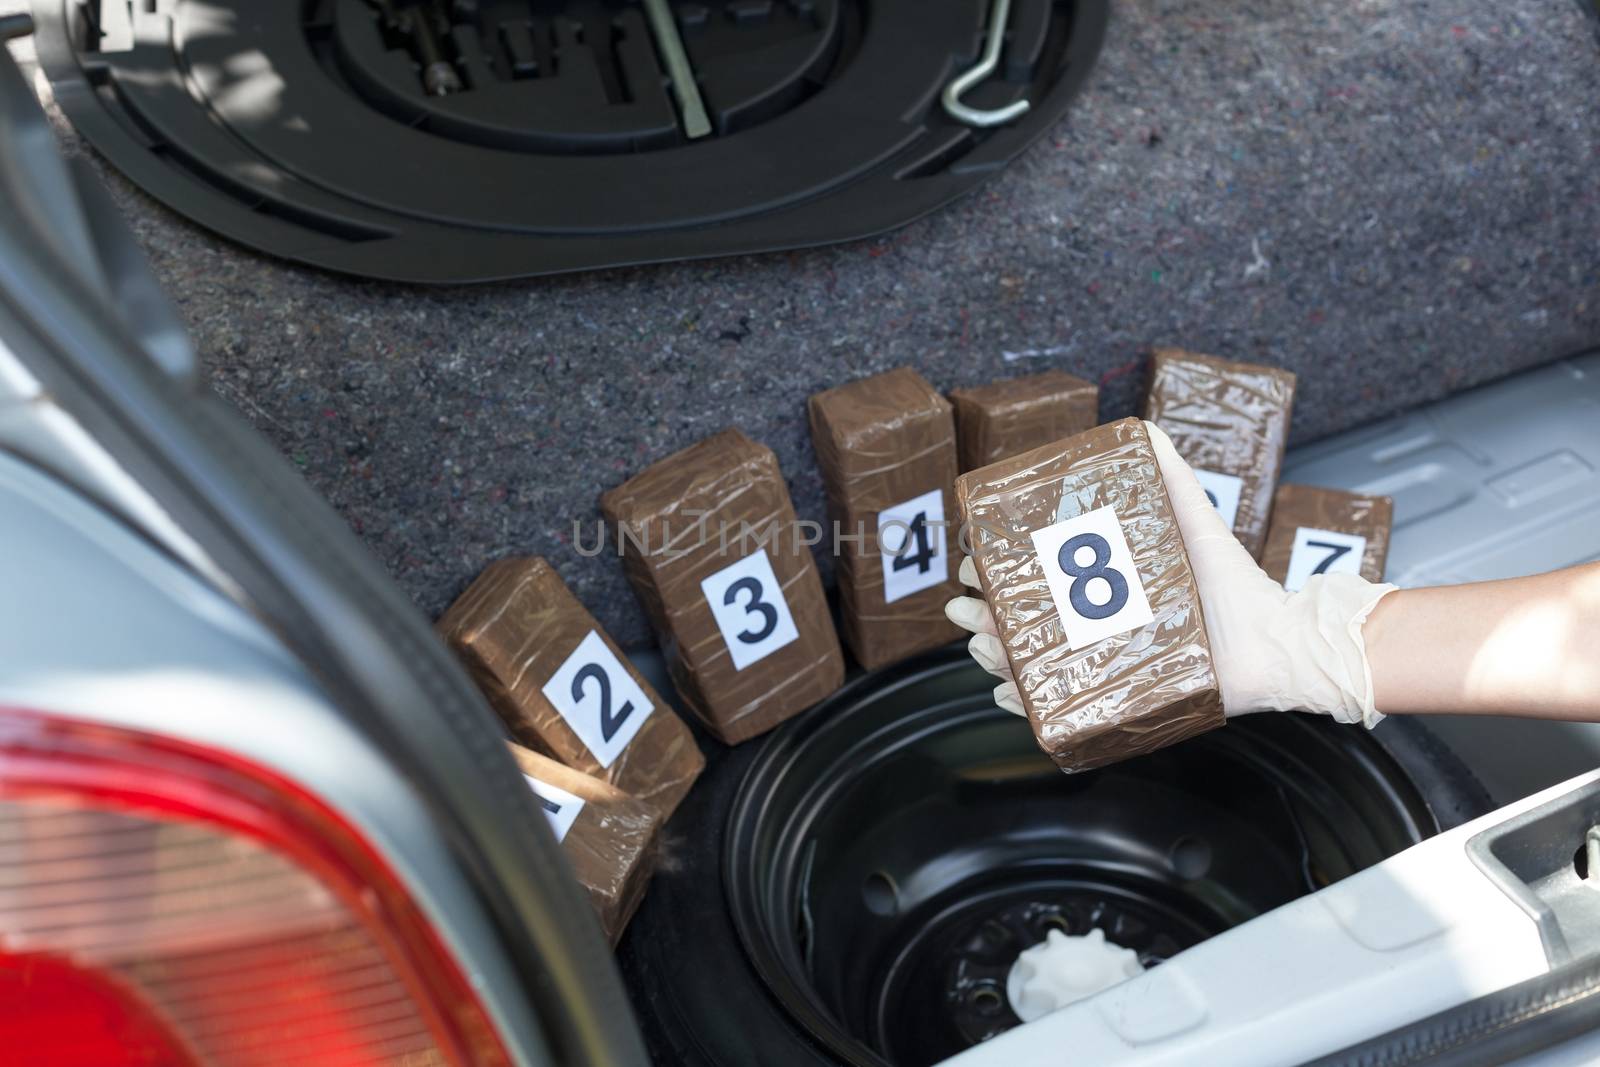 Crime scene: Drug packages hidden in the trunk of a car